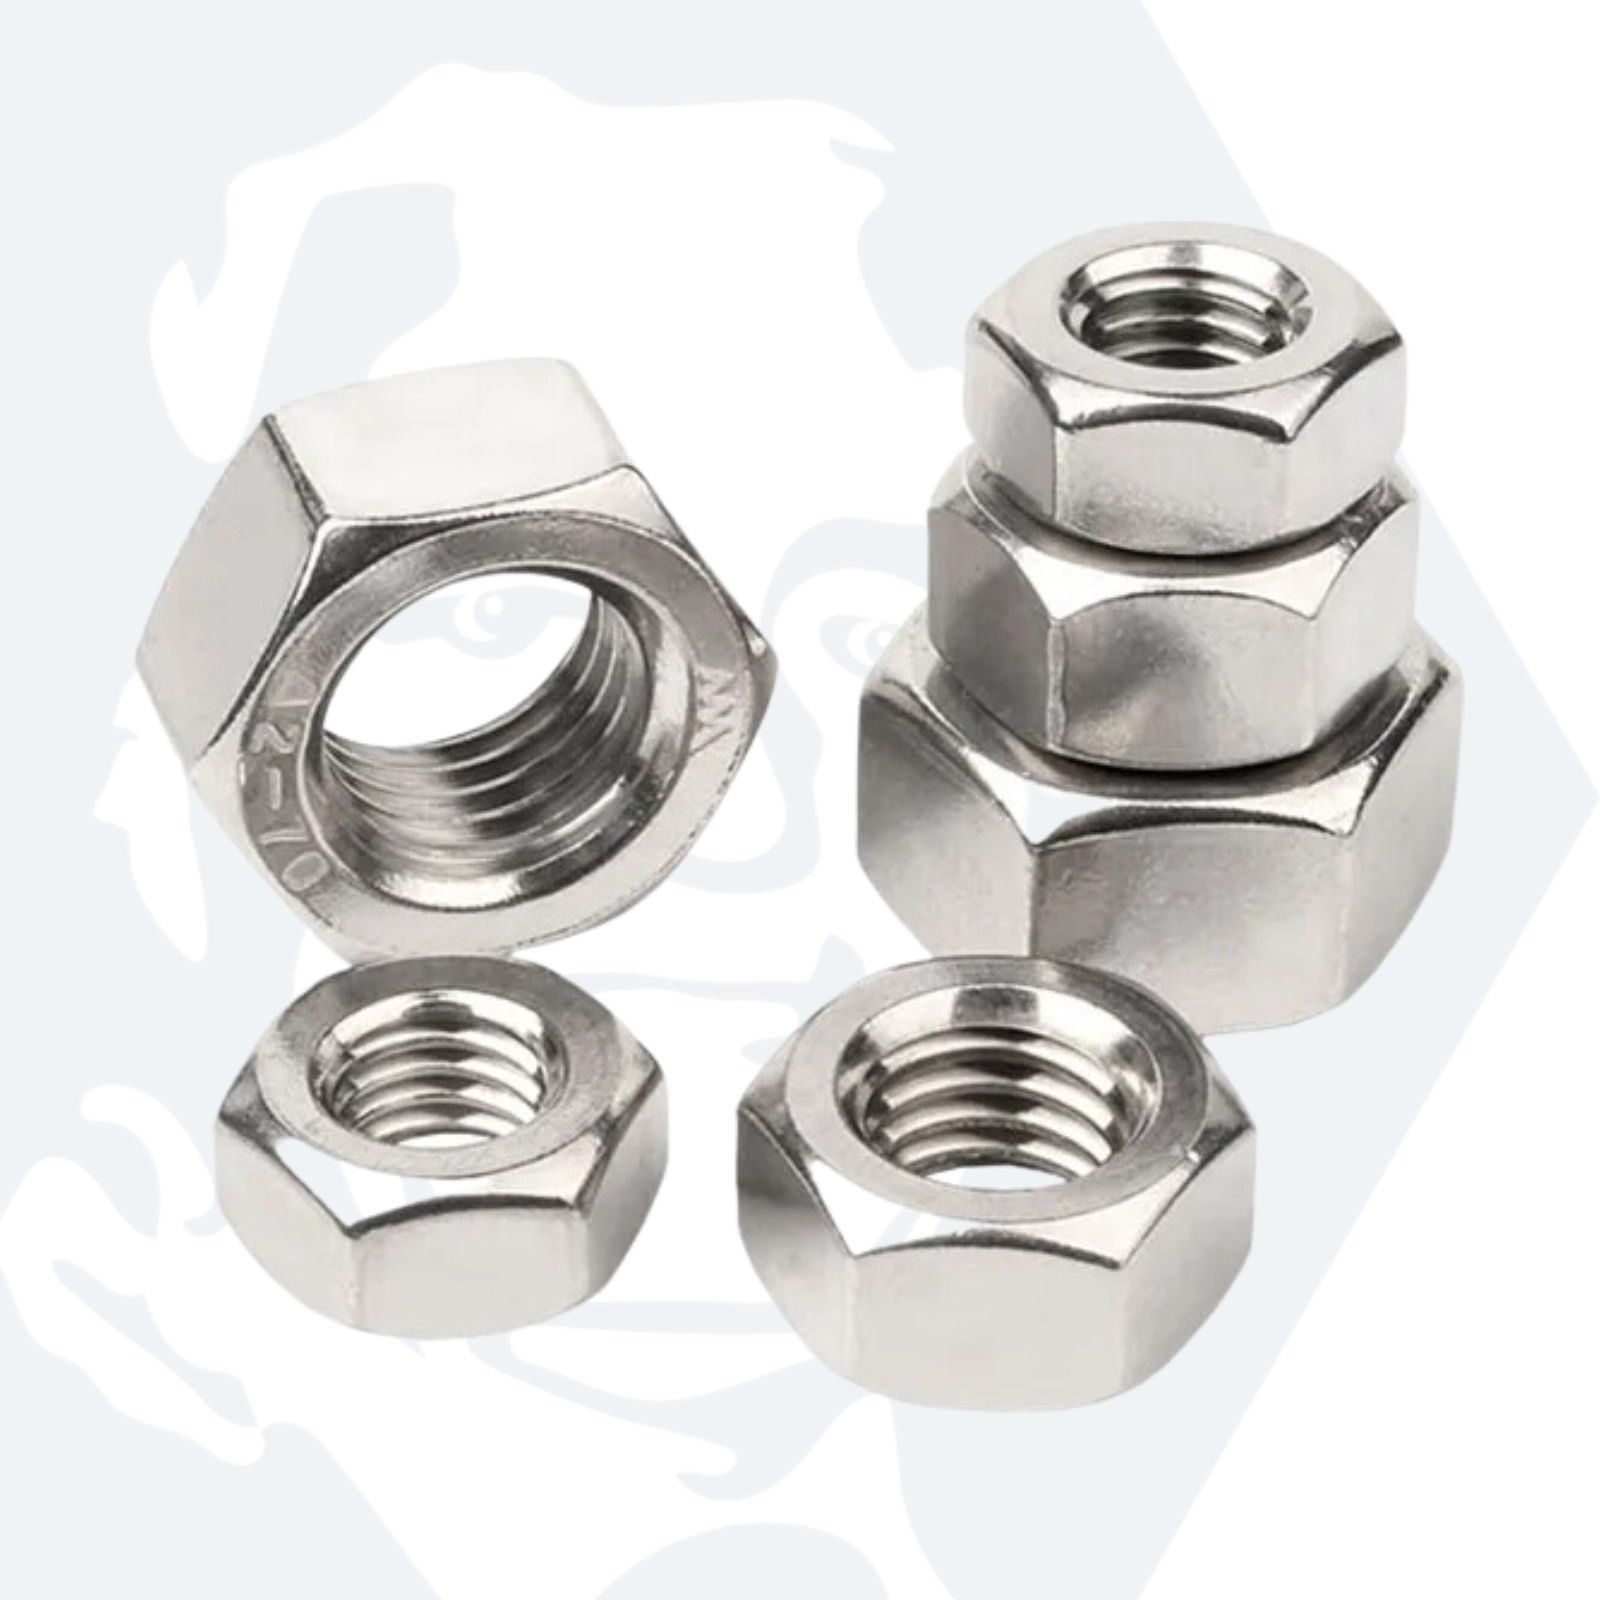 M8 Hexagon Nuts (DIN 934) - Stainless Steel (A2)